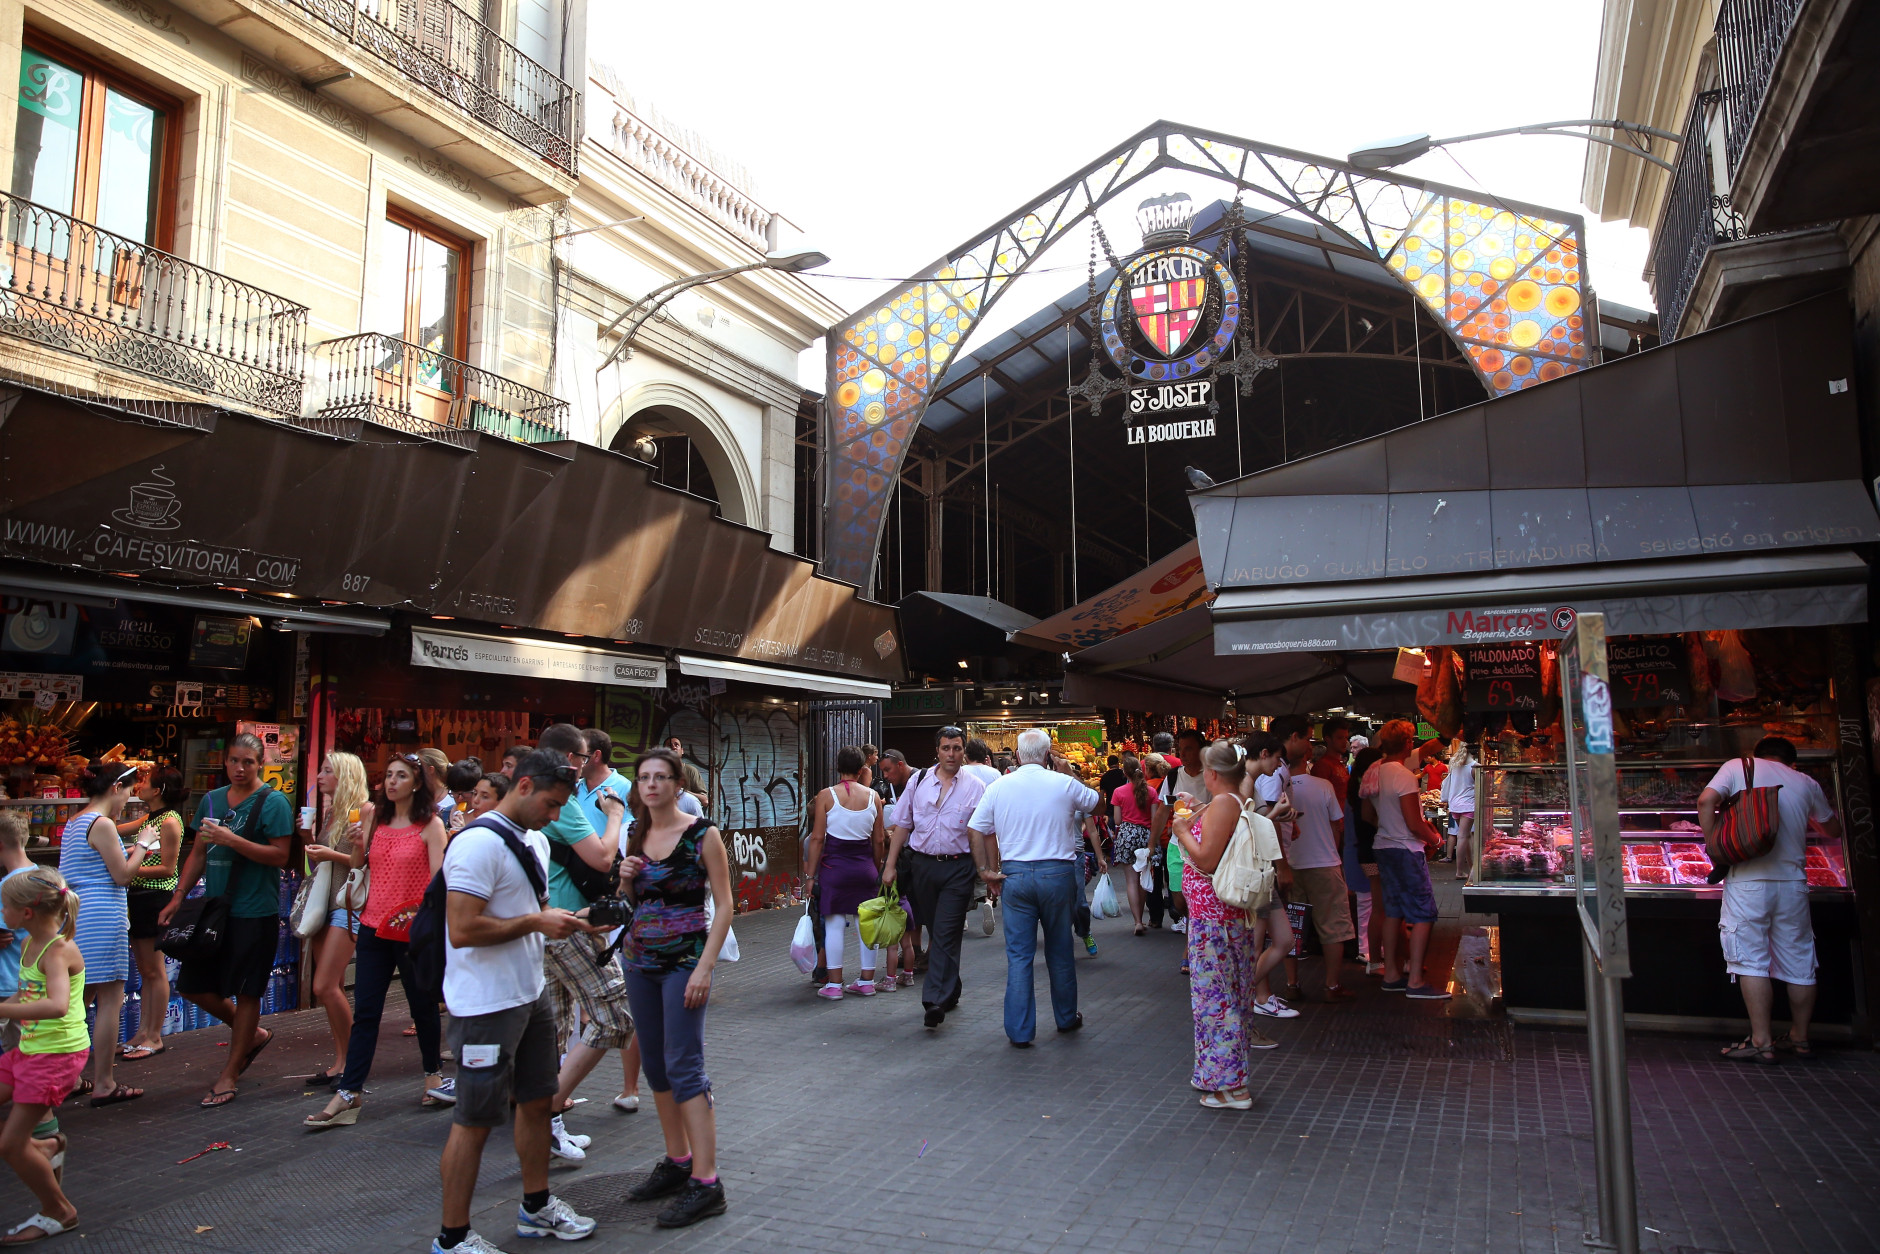 BARCELONA, SPAIN - JULY 17:  A general view of the La Boqueria St. Joseph market at  La Ramblas on July 17, 2013 in Barcelona, Spain.  (Photo by Alexander Hassenstein/Getty Images)